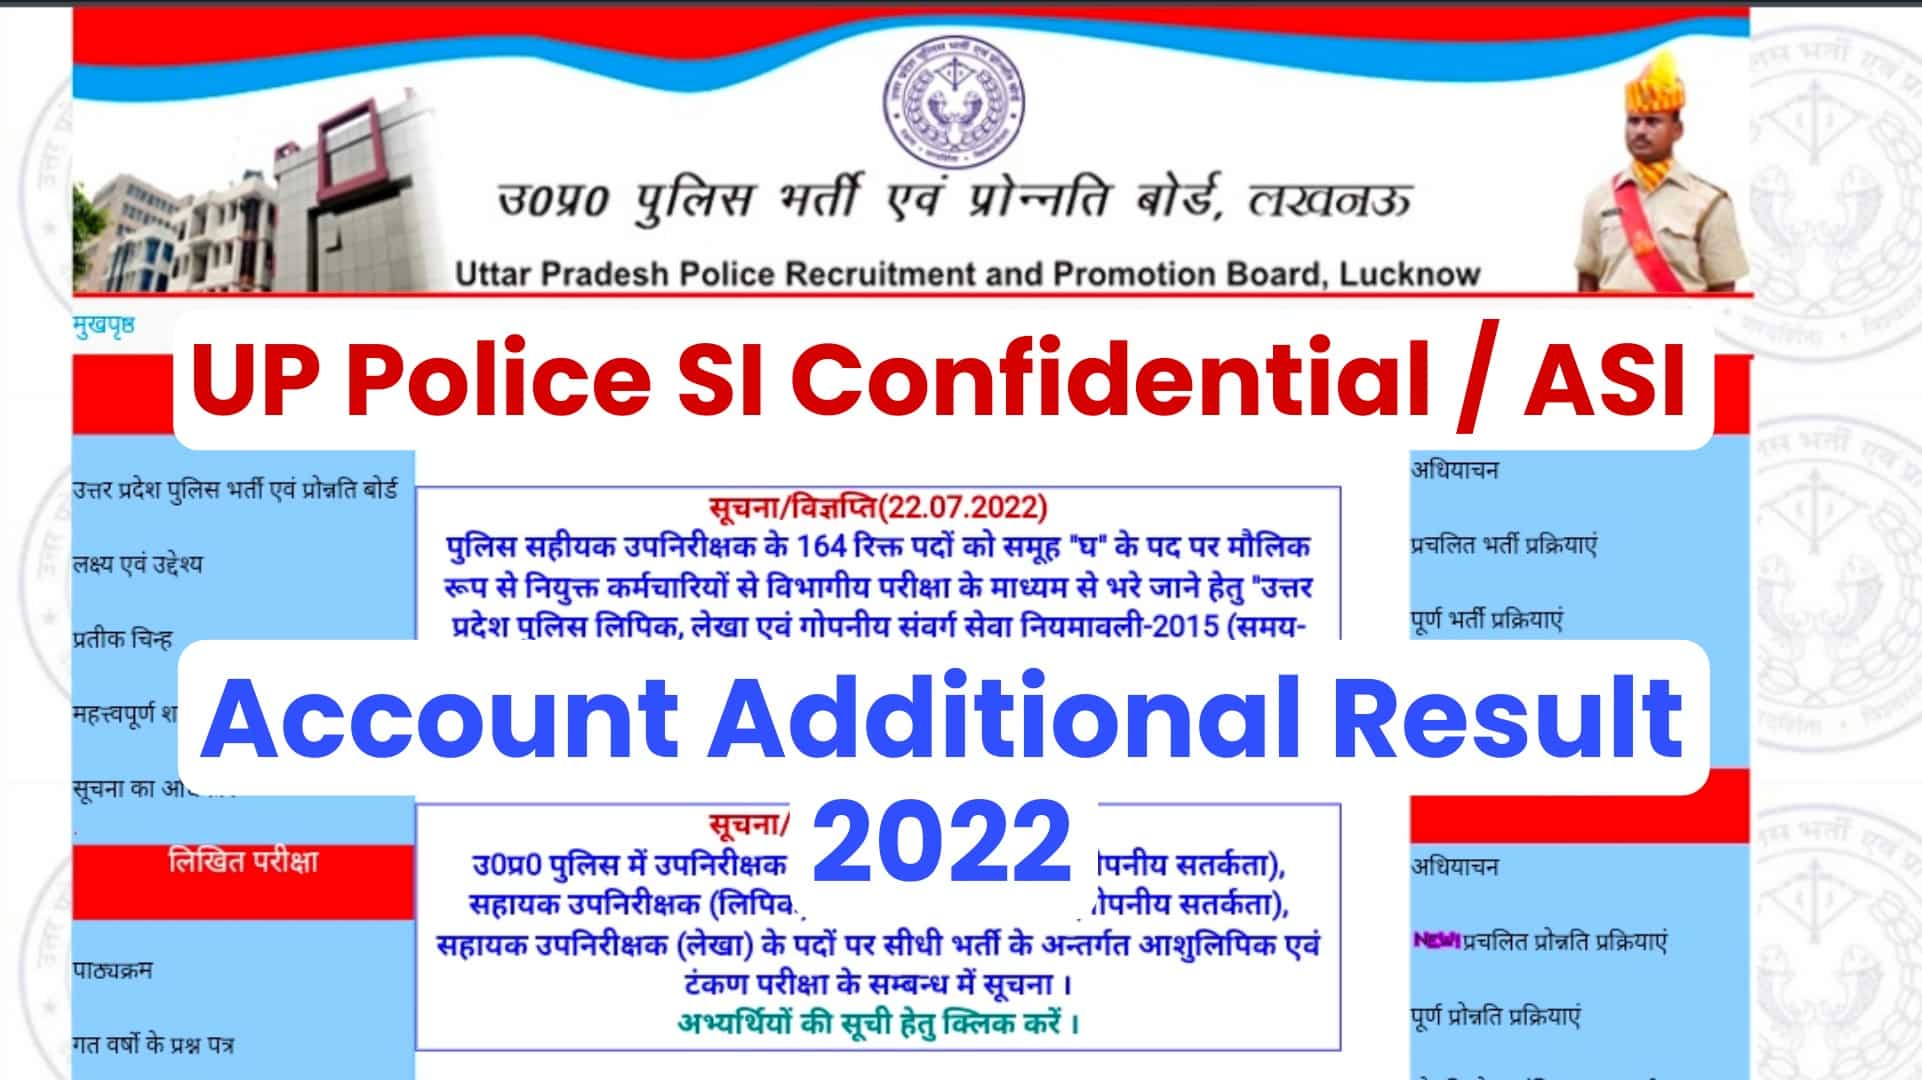 UP Police SI Confidential / ASI Account Additional Result 2022